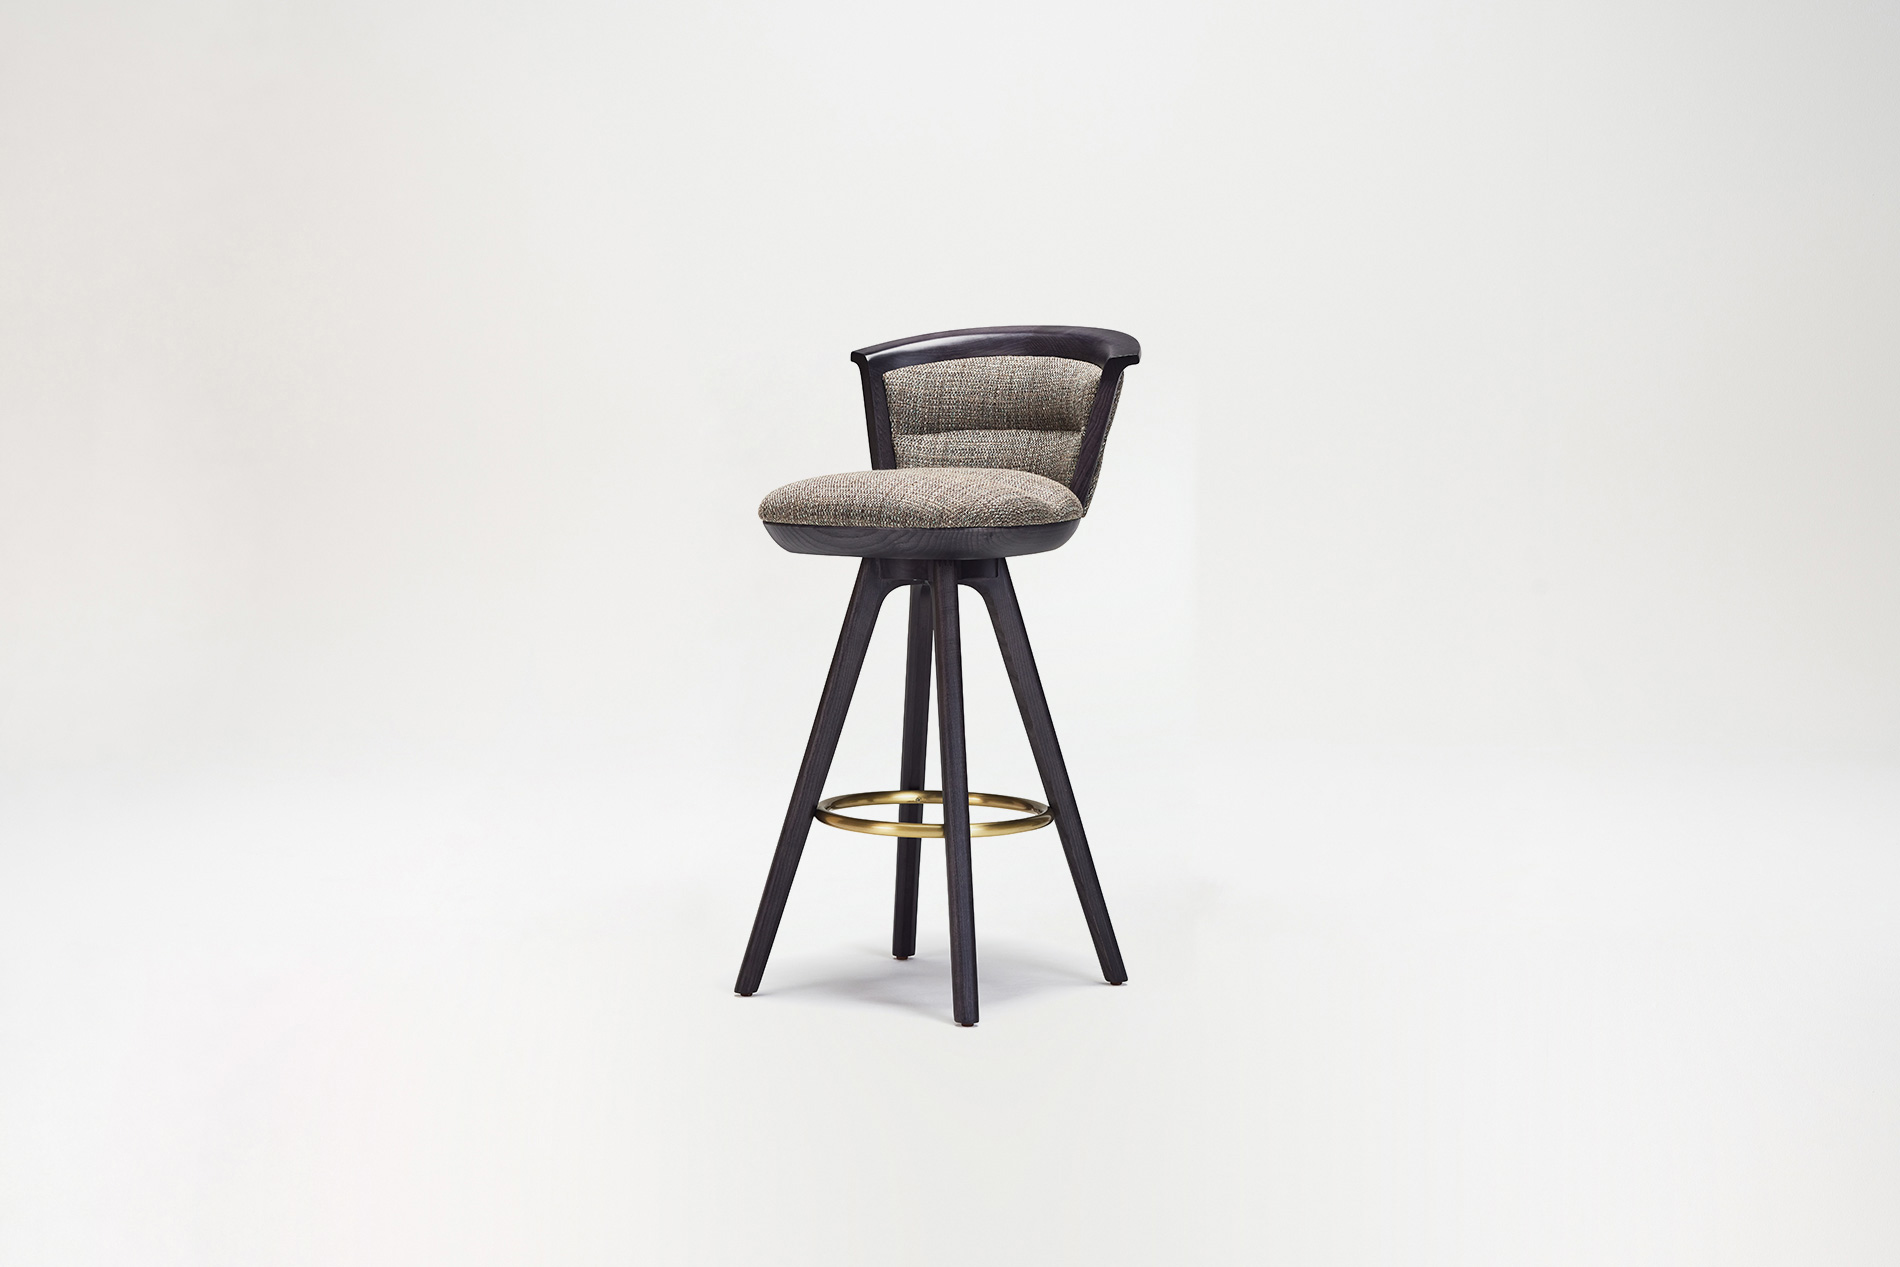 It speaks a universal language, telling its story through the purest form, creating a unique blend that captivates and inspires.ORVI BAR STOOL